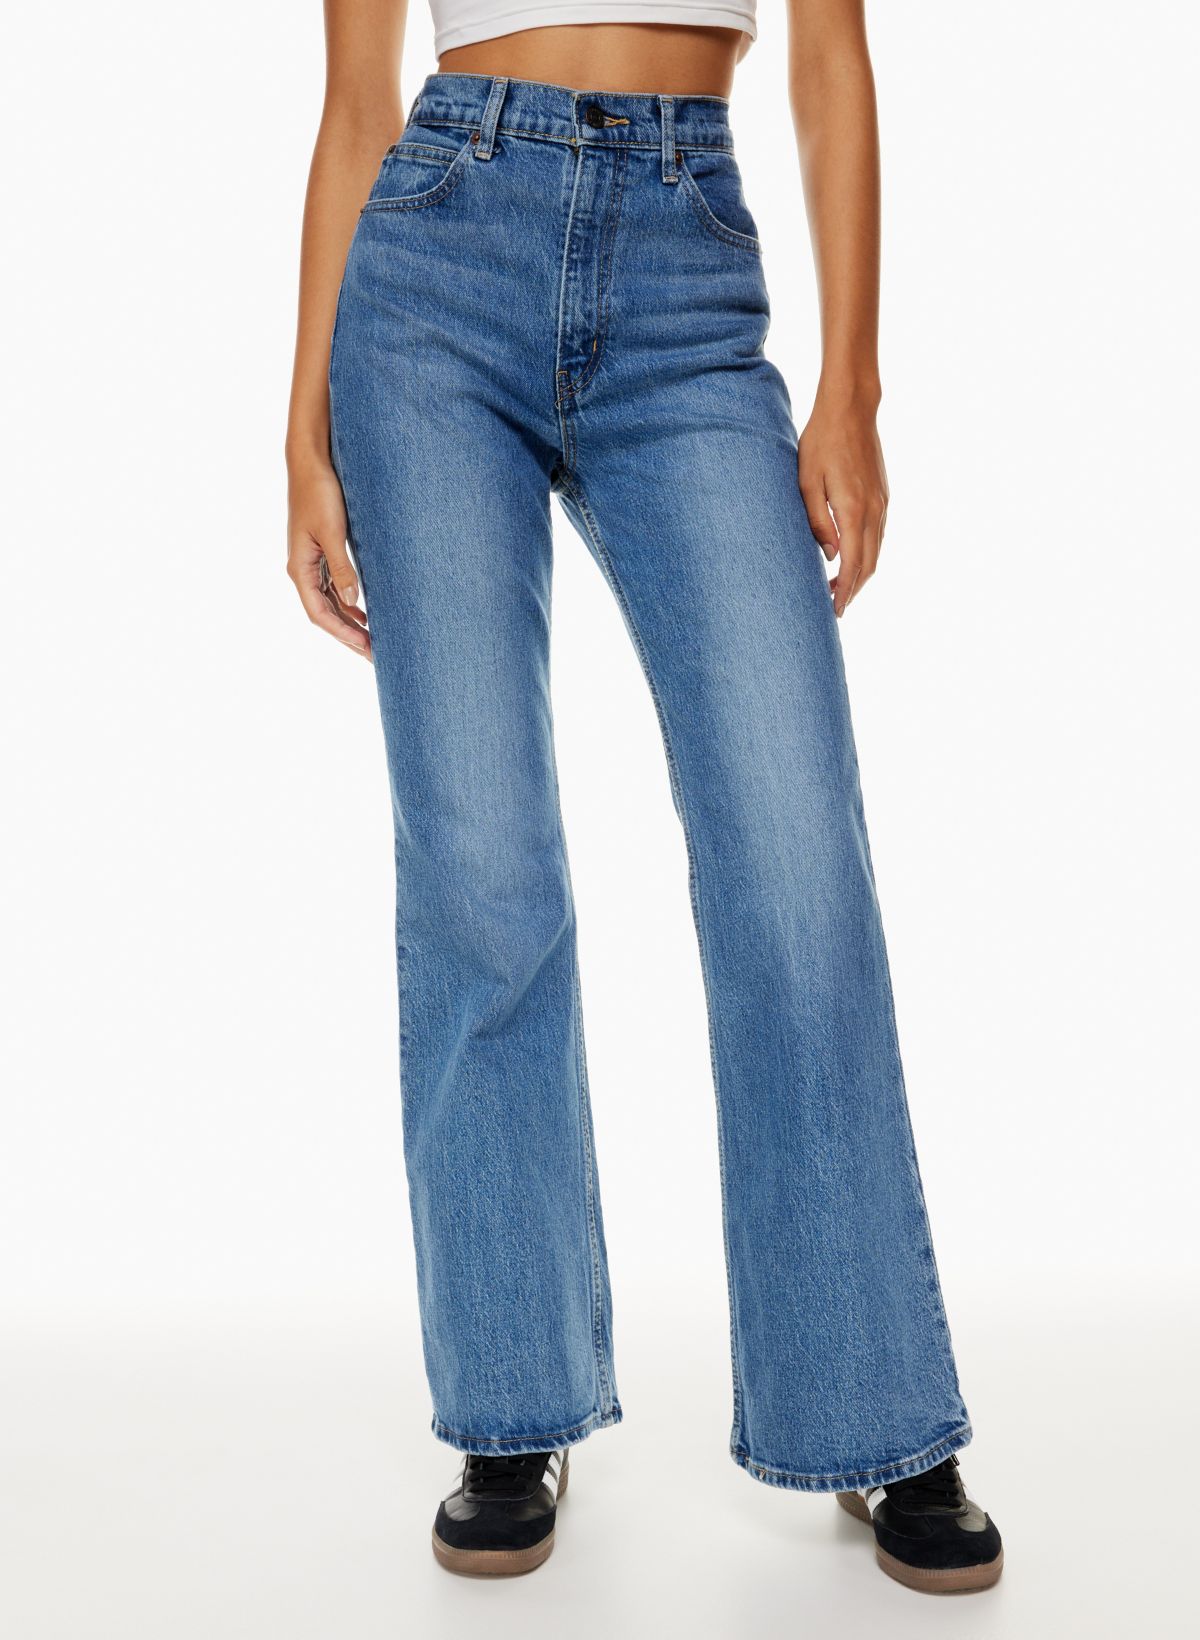 High Rise '70s Flare Jeans  Flare jeans, Best jeans for women, Flares